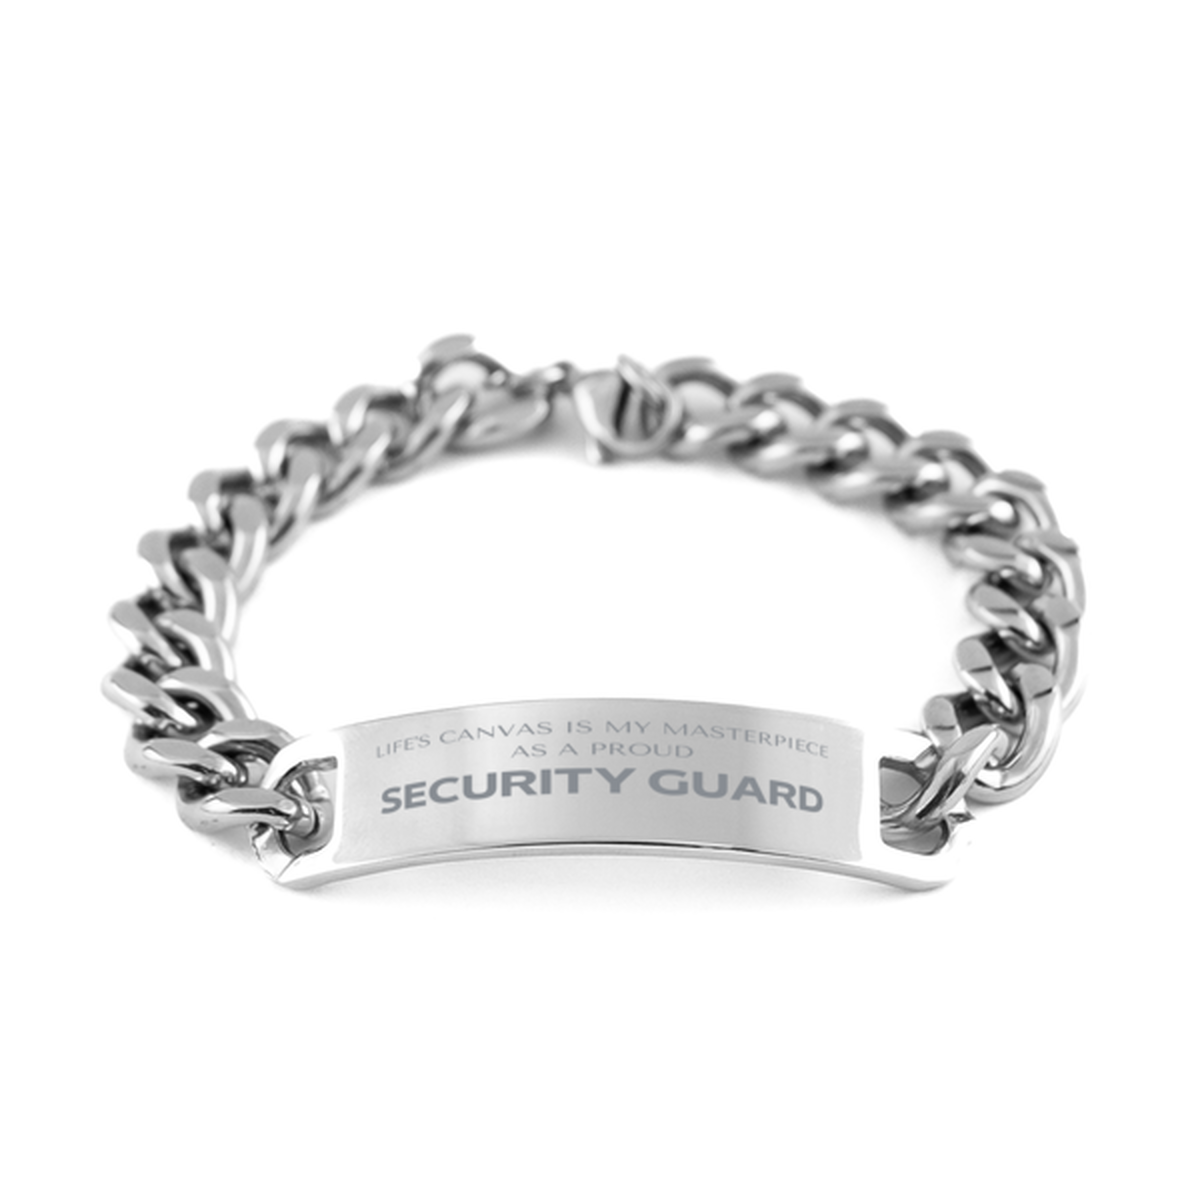 Proud Security Guard Gifts, Life's canvas is my masterpiece, Epic Birthday Christmas Unique Cuban Chain Stainless Steel Bracelet For Security Guard, Coworkers, Men, Women, Friends